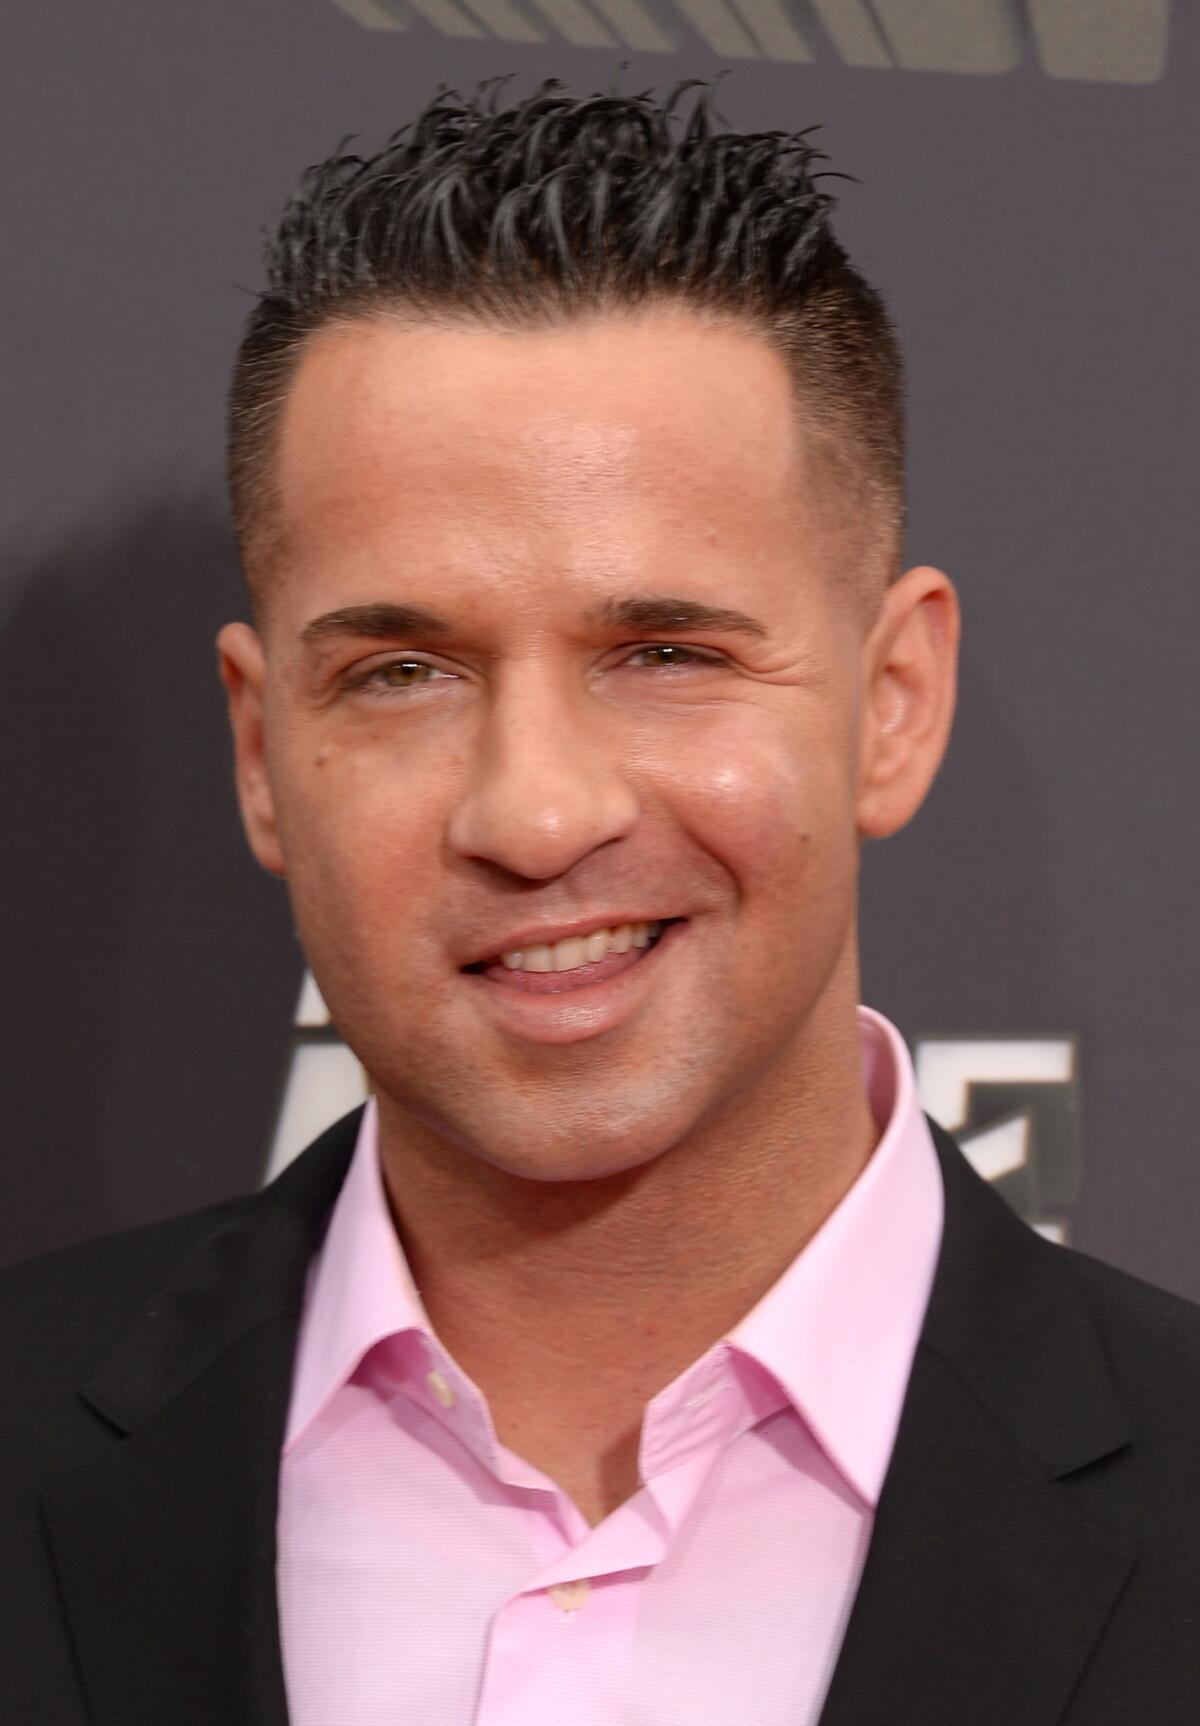 Mike "The Situation" Sorrentino arrives at the 2013 MTV Movie Awards in April 2013.